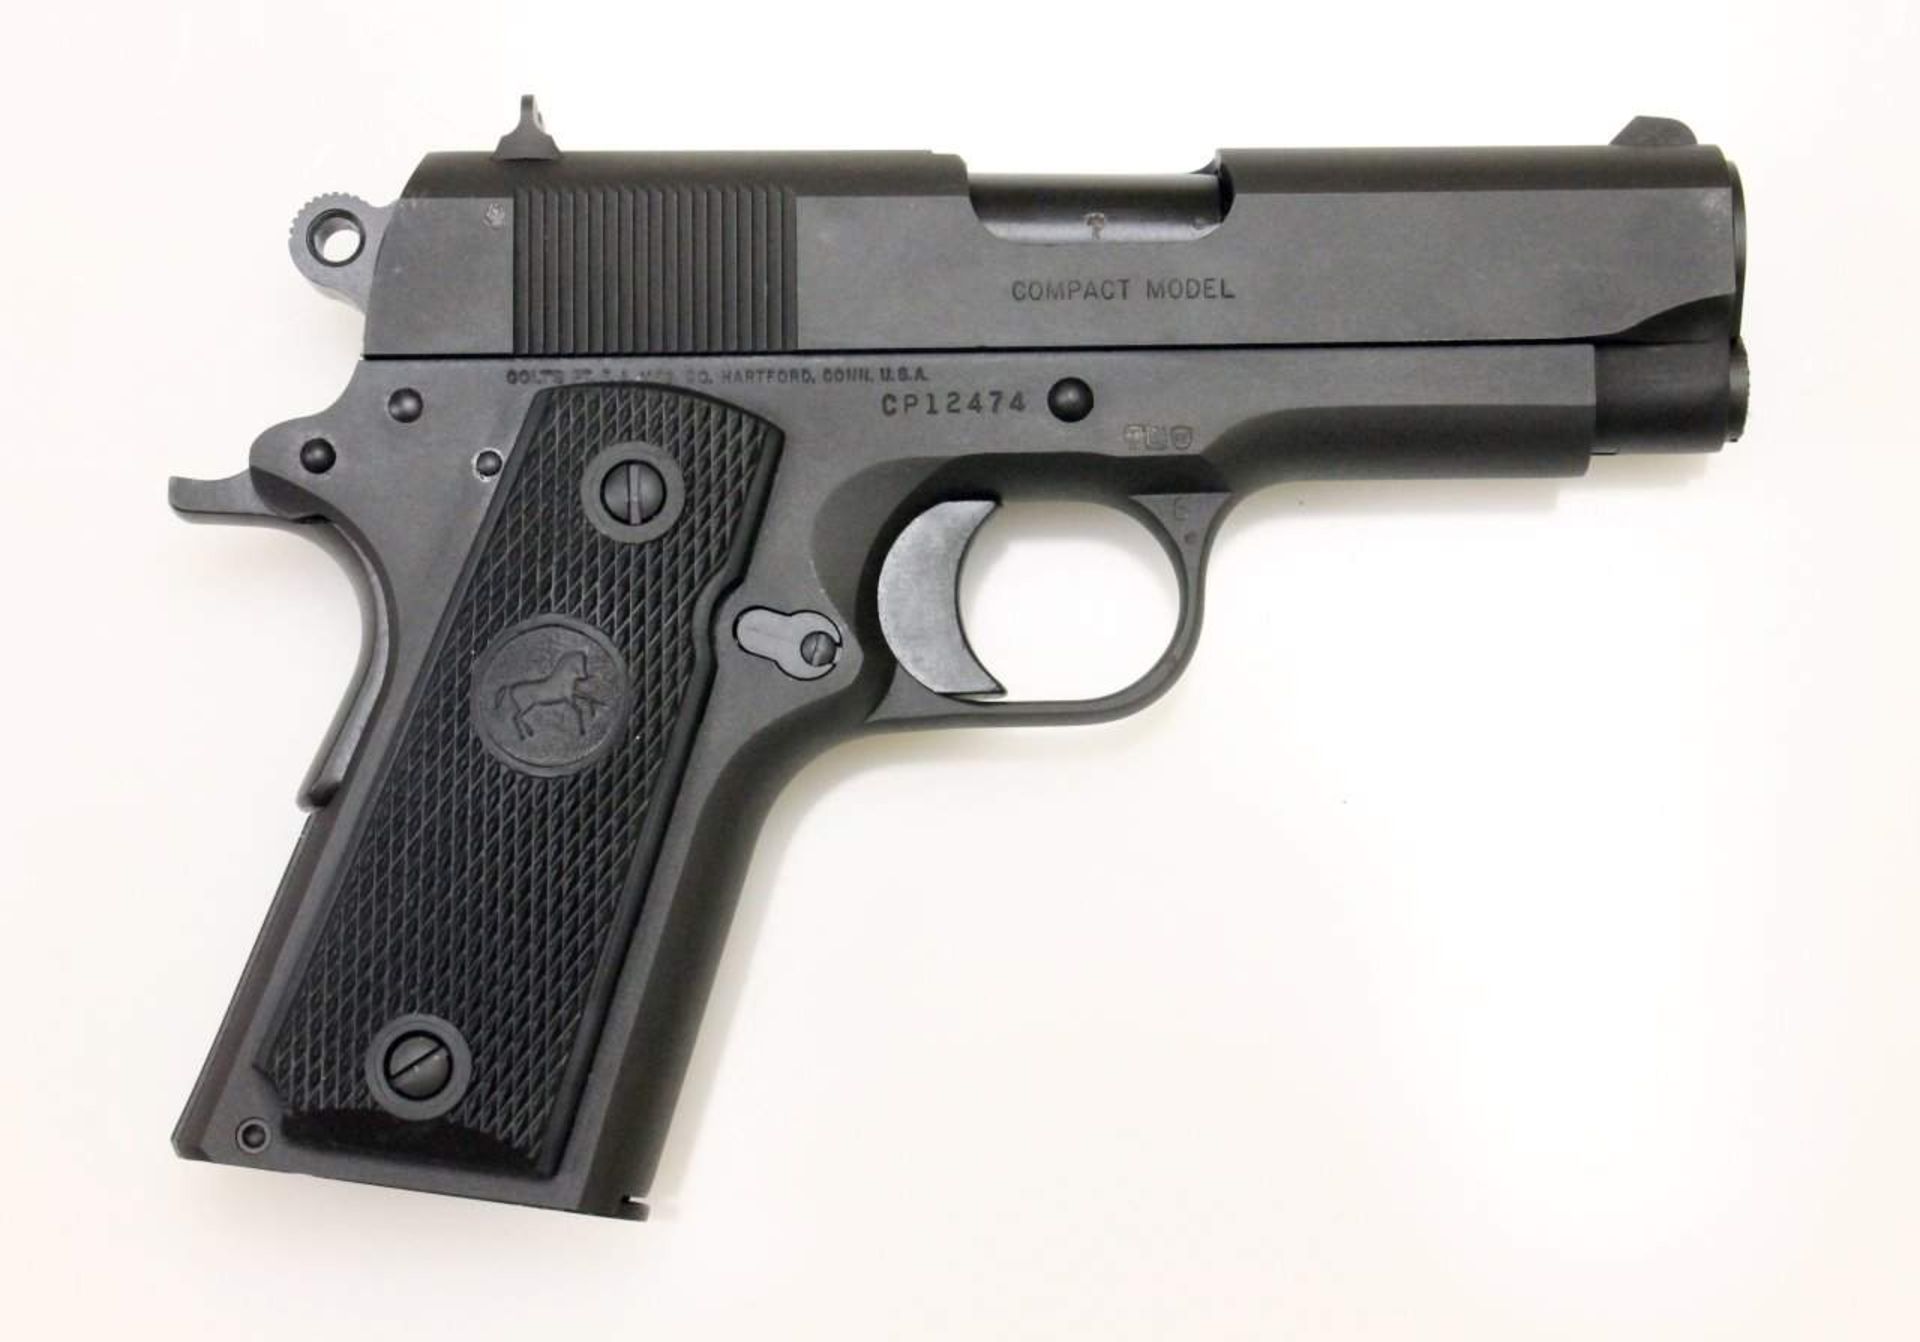 Selbstladepistole Colt, Modell: 1991 A1 Compact Cal. .45 ACP, S/N: CP12474, Lauf spiegelblank,